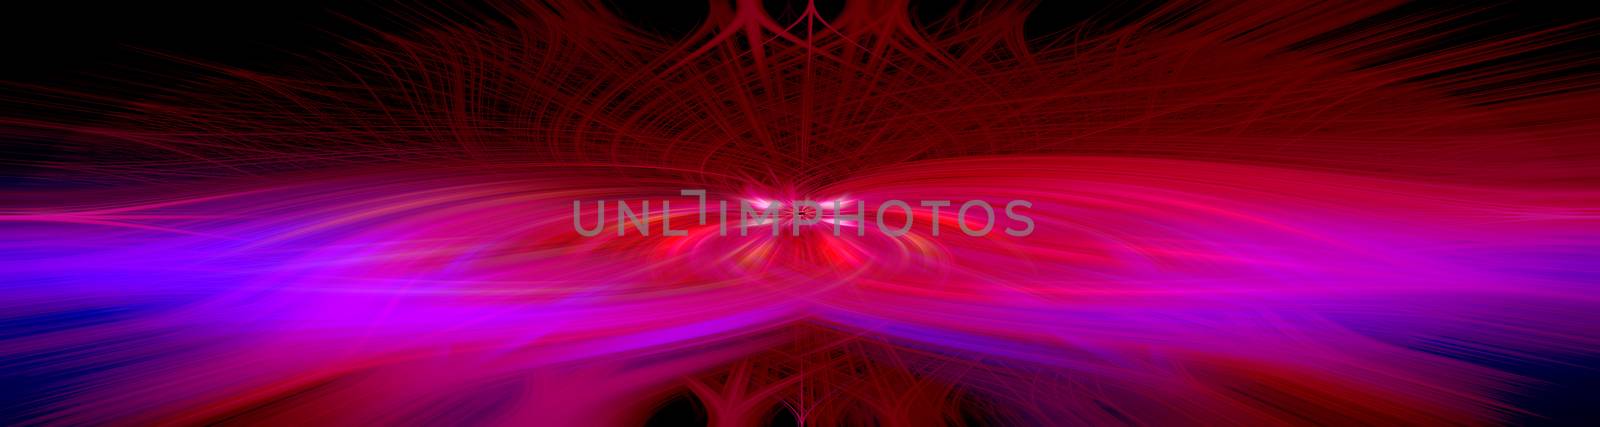 Beautiful abstract intertwined 3d fibers forming an ornament made of various symmetrical shapes. Purple, red, and blue colors. Red and black background. Illustration. Panorama size